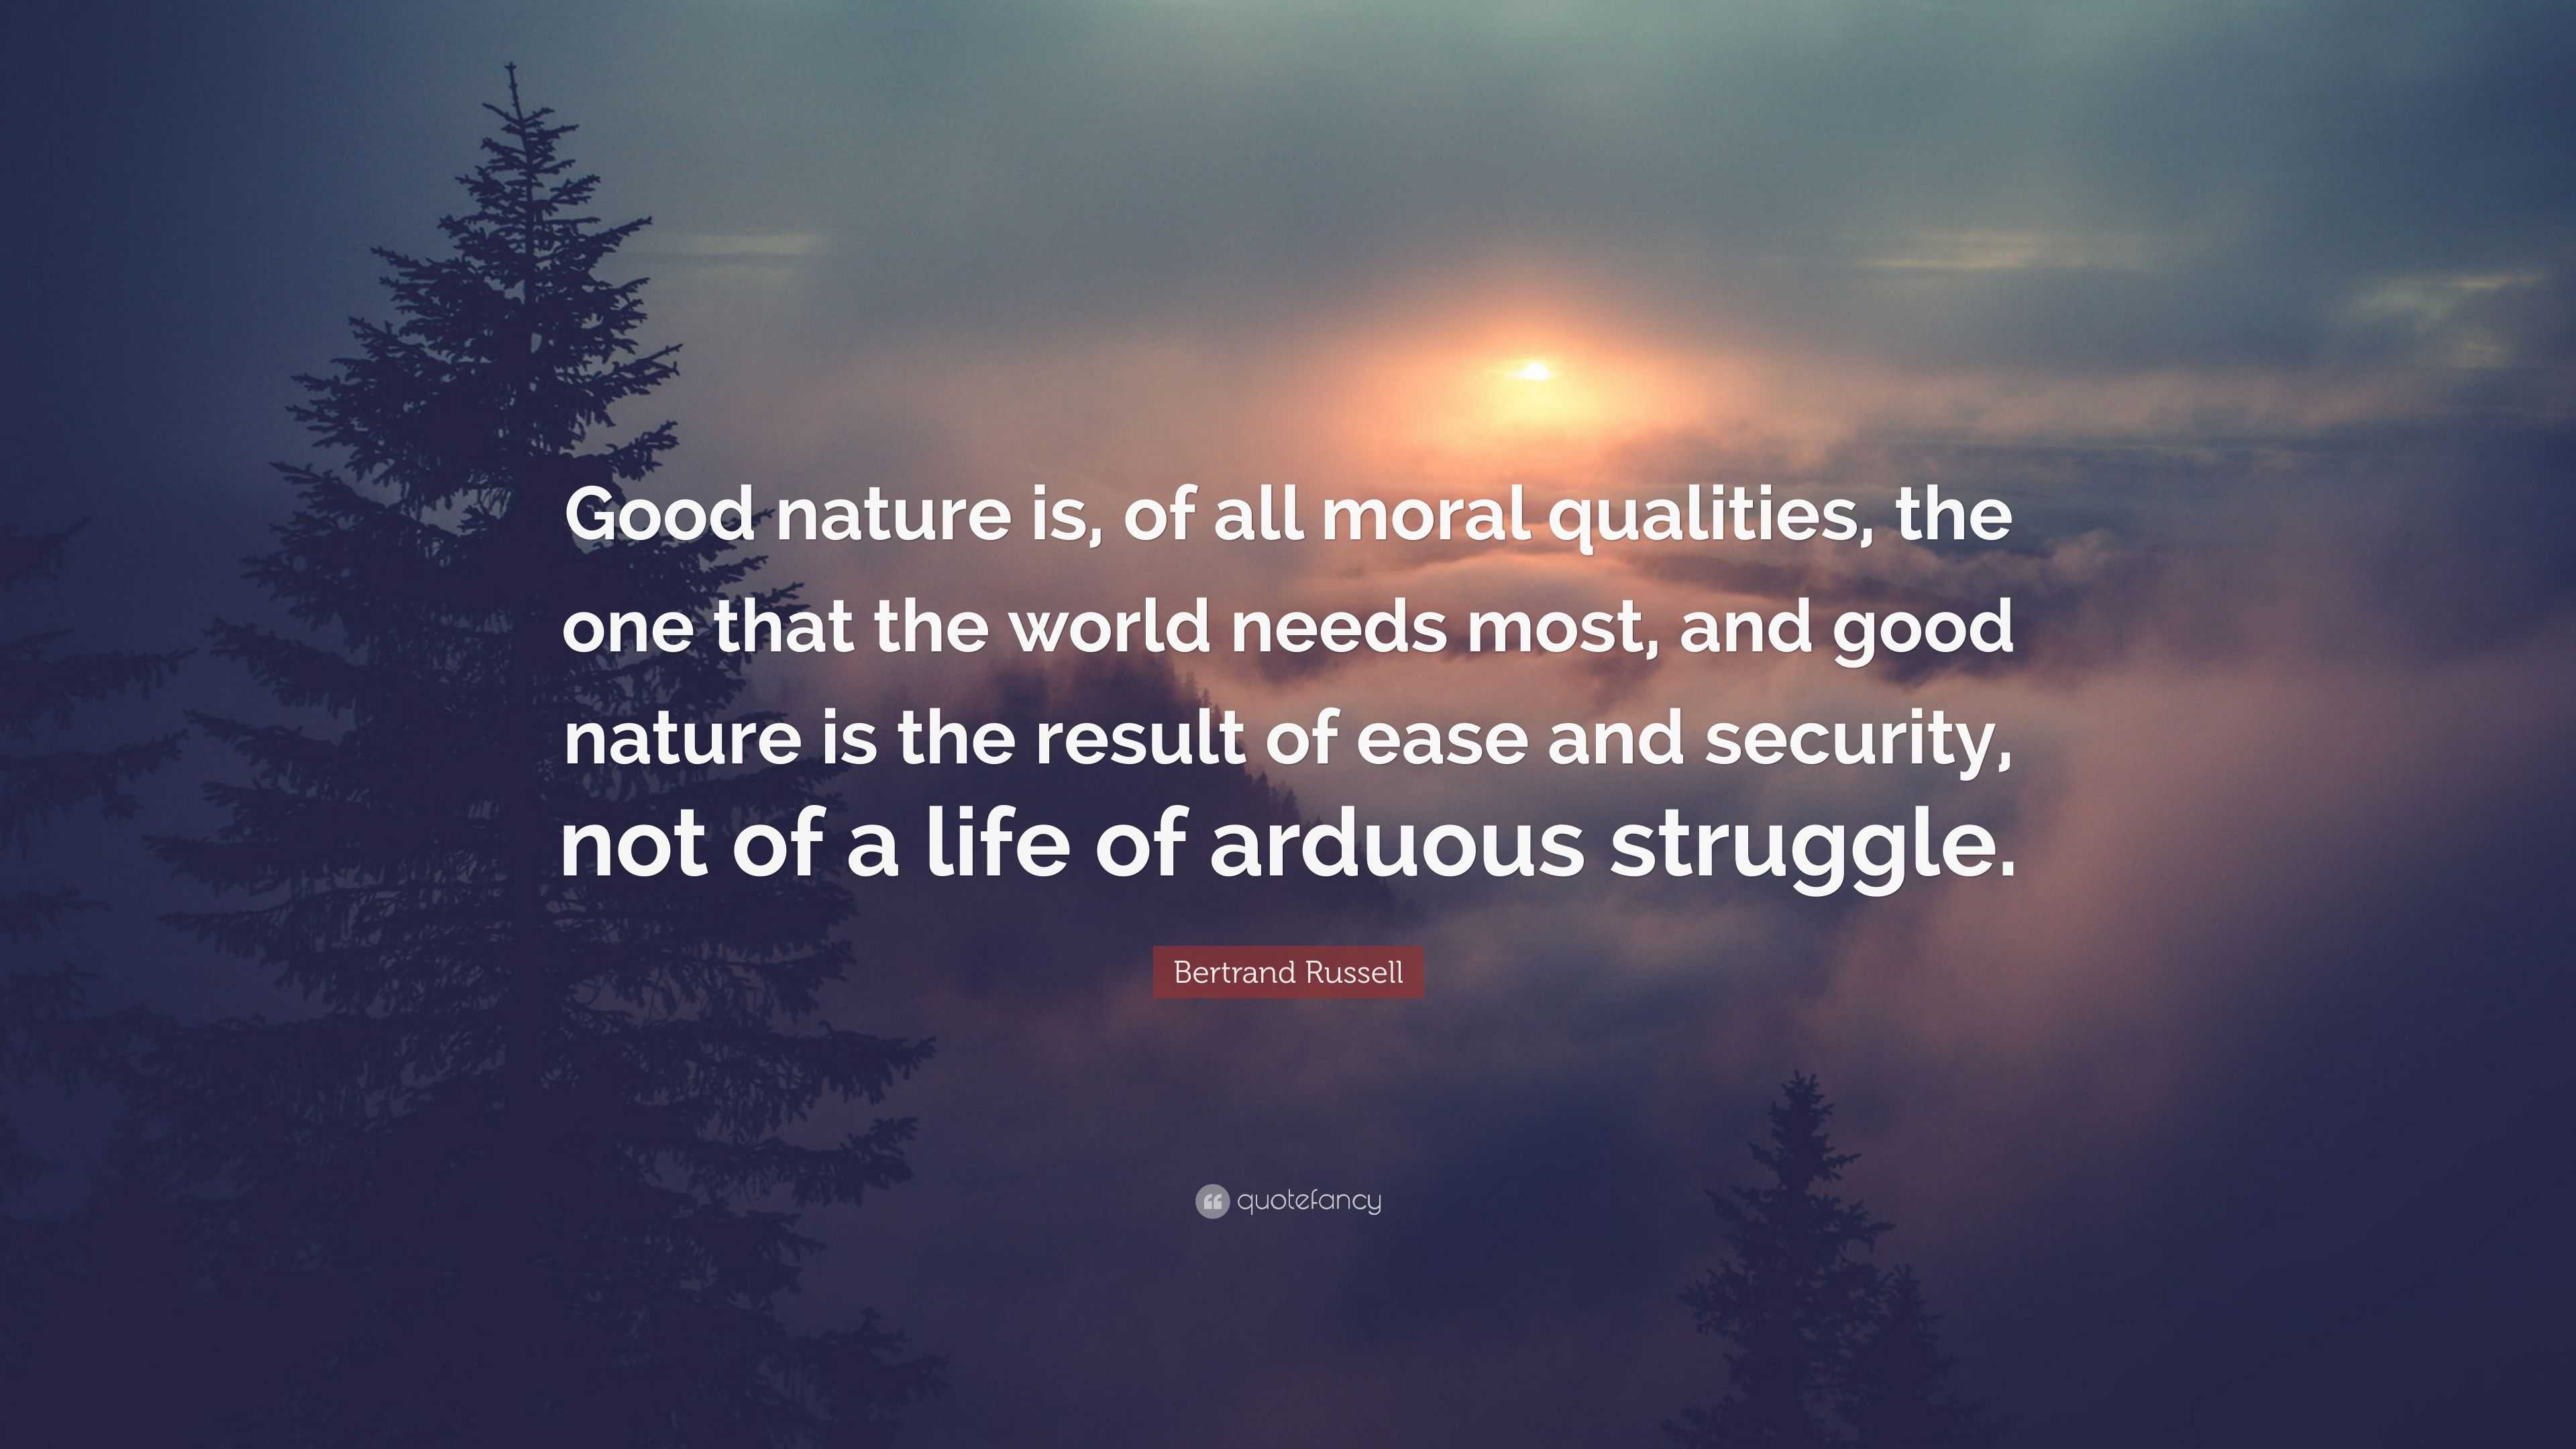 Bertrand Russell Quote: “Good nature is, of all moral qualities, the one that the world needs most, and good nature is the result of and sec...”